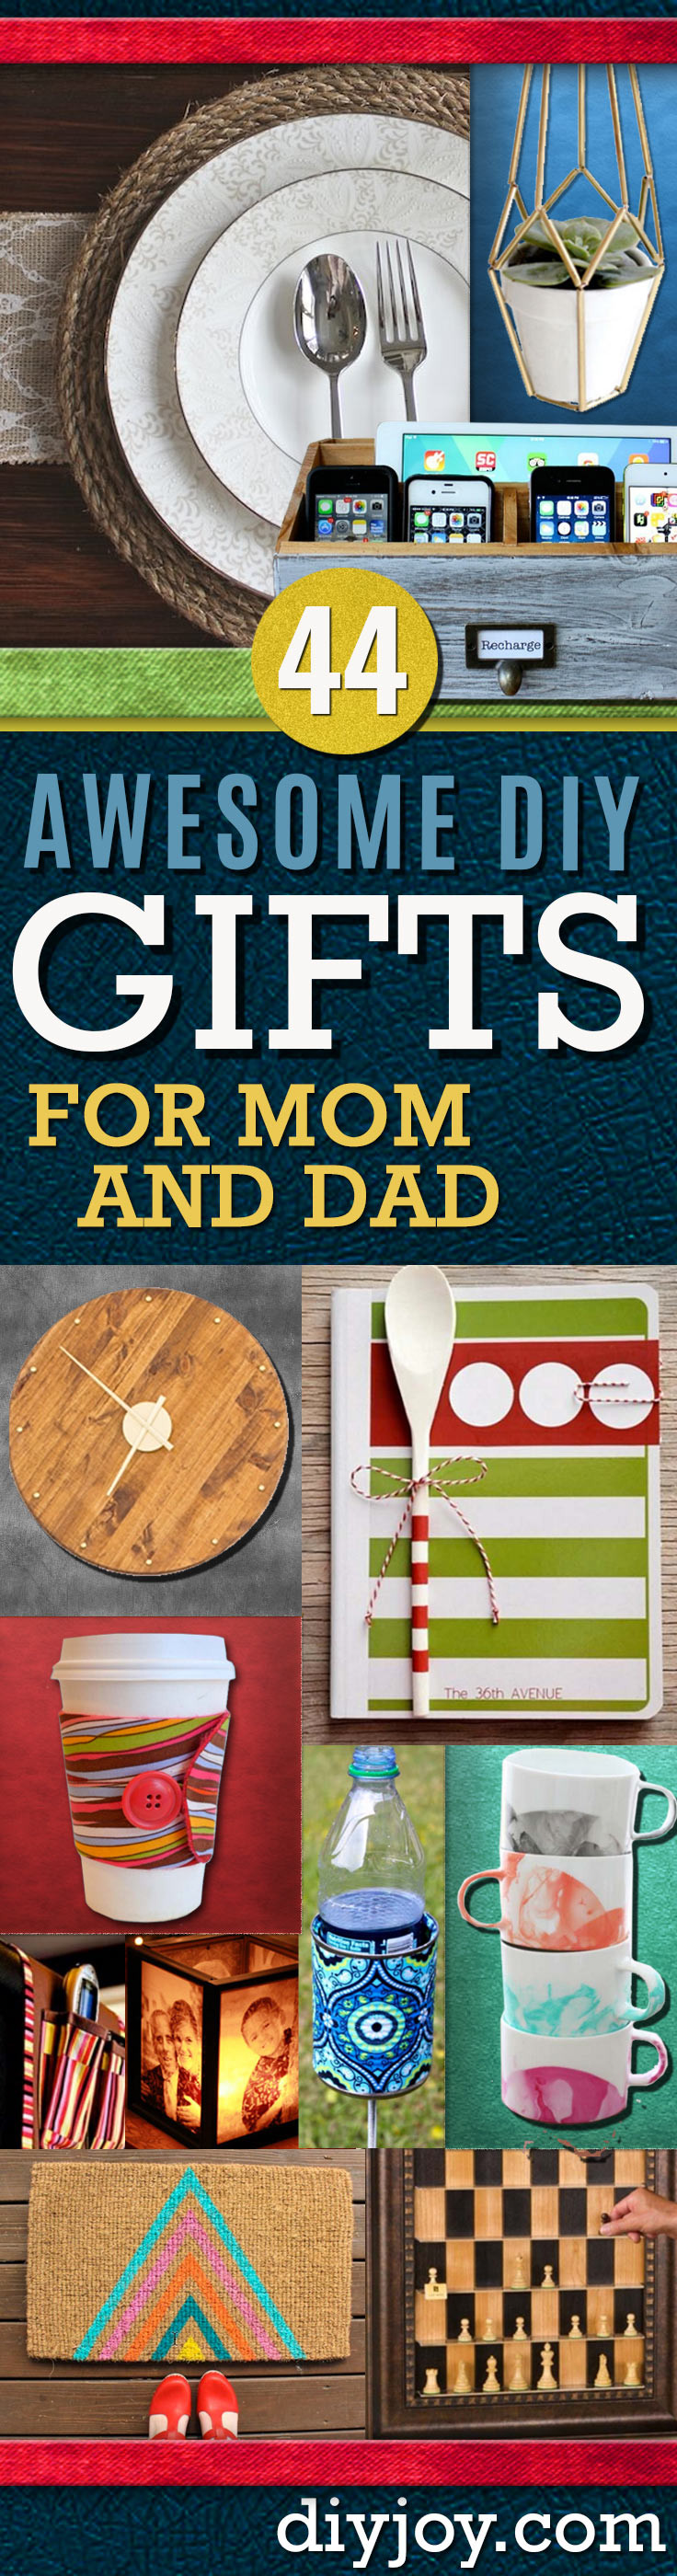 Homemade Christmas Gift Ideas For Mom
 Awesome DIY Gift Ideas Mom and Dad Will Love